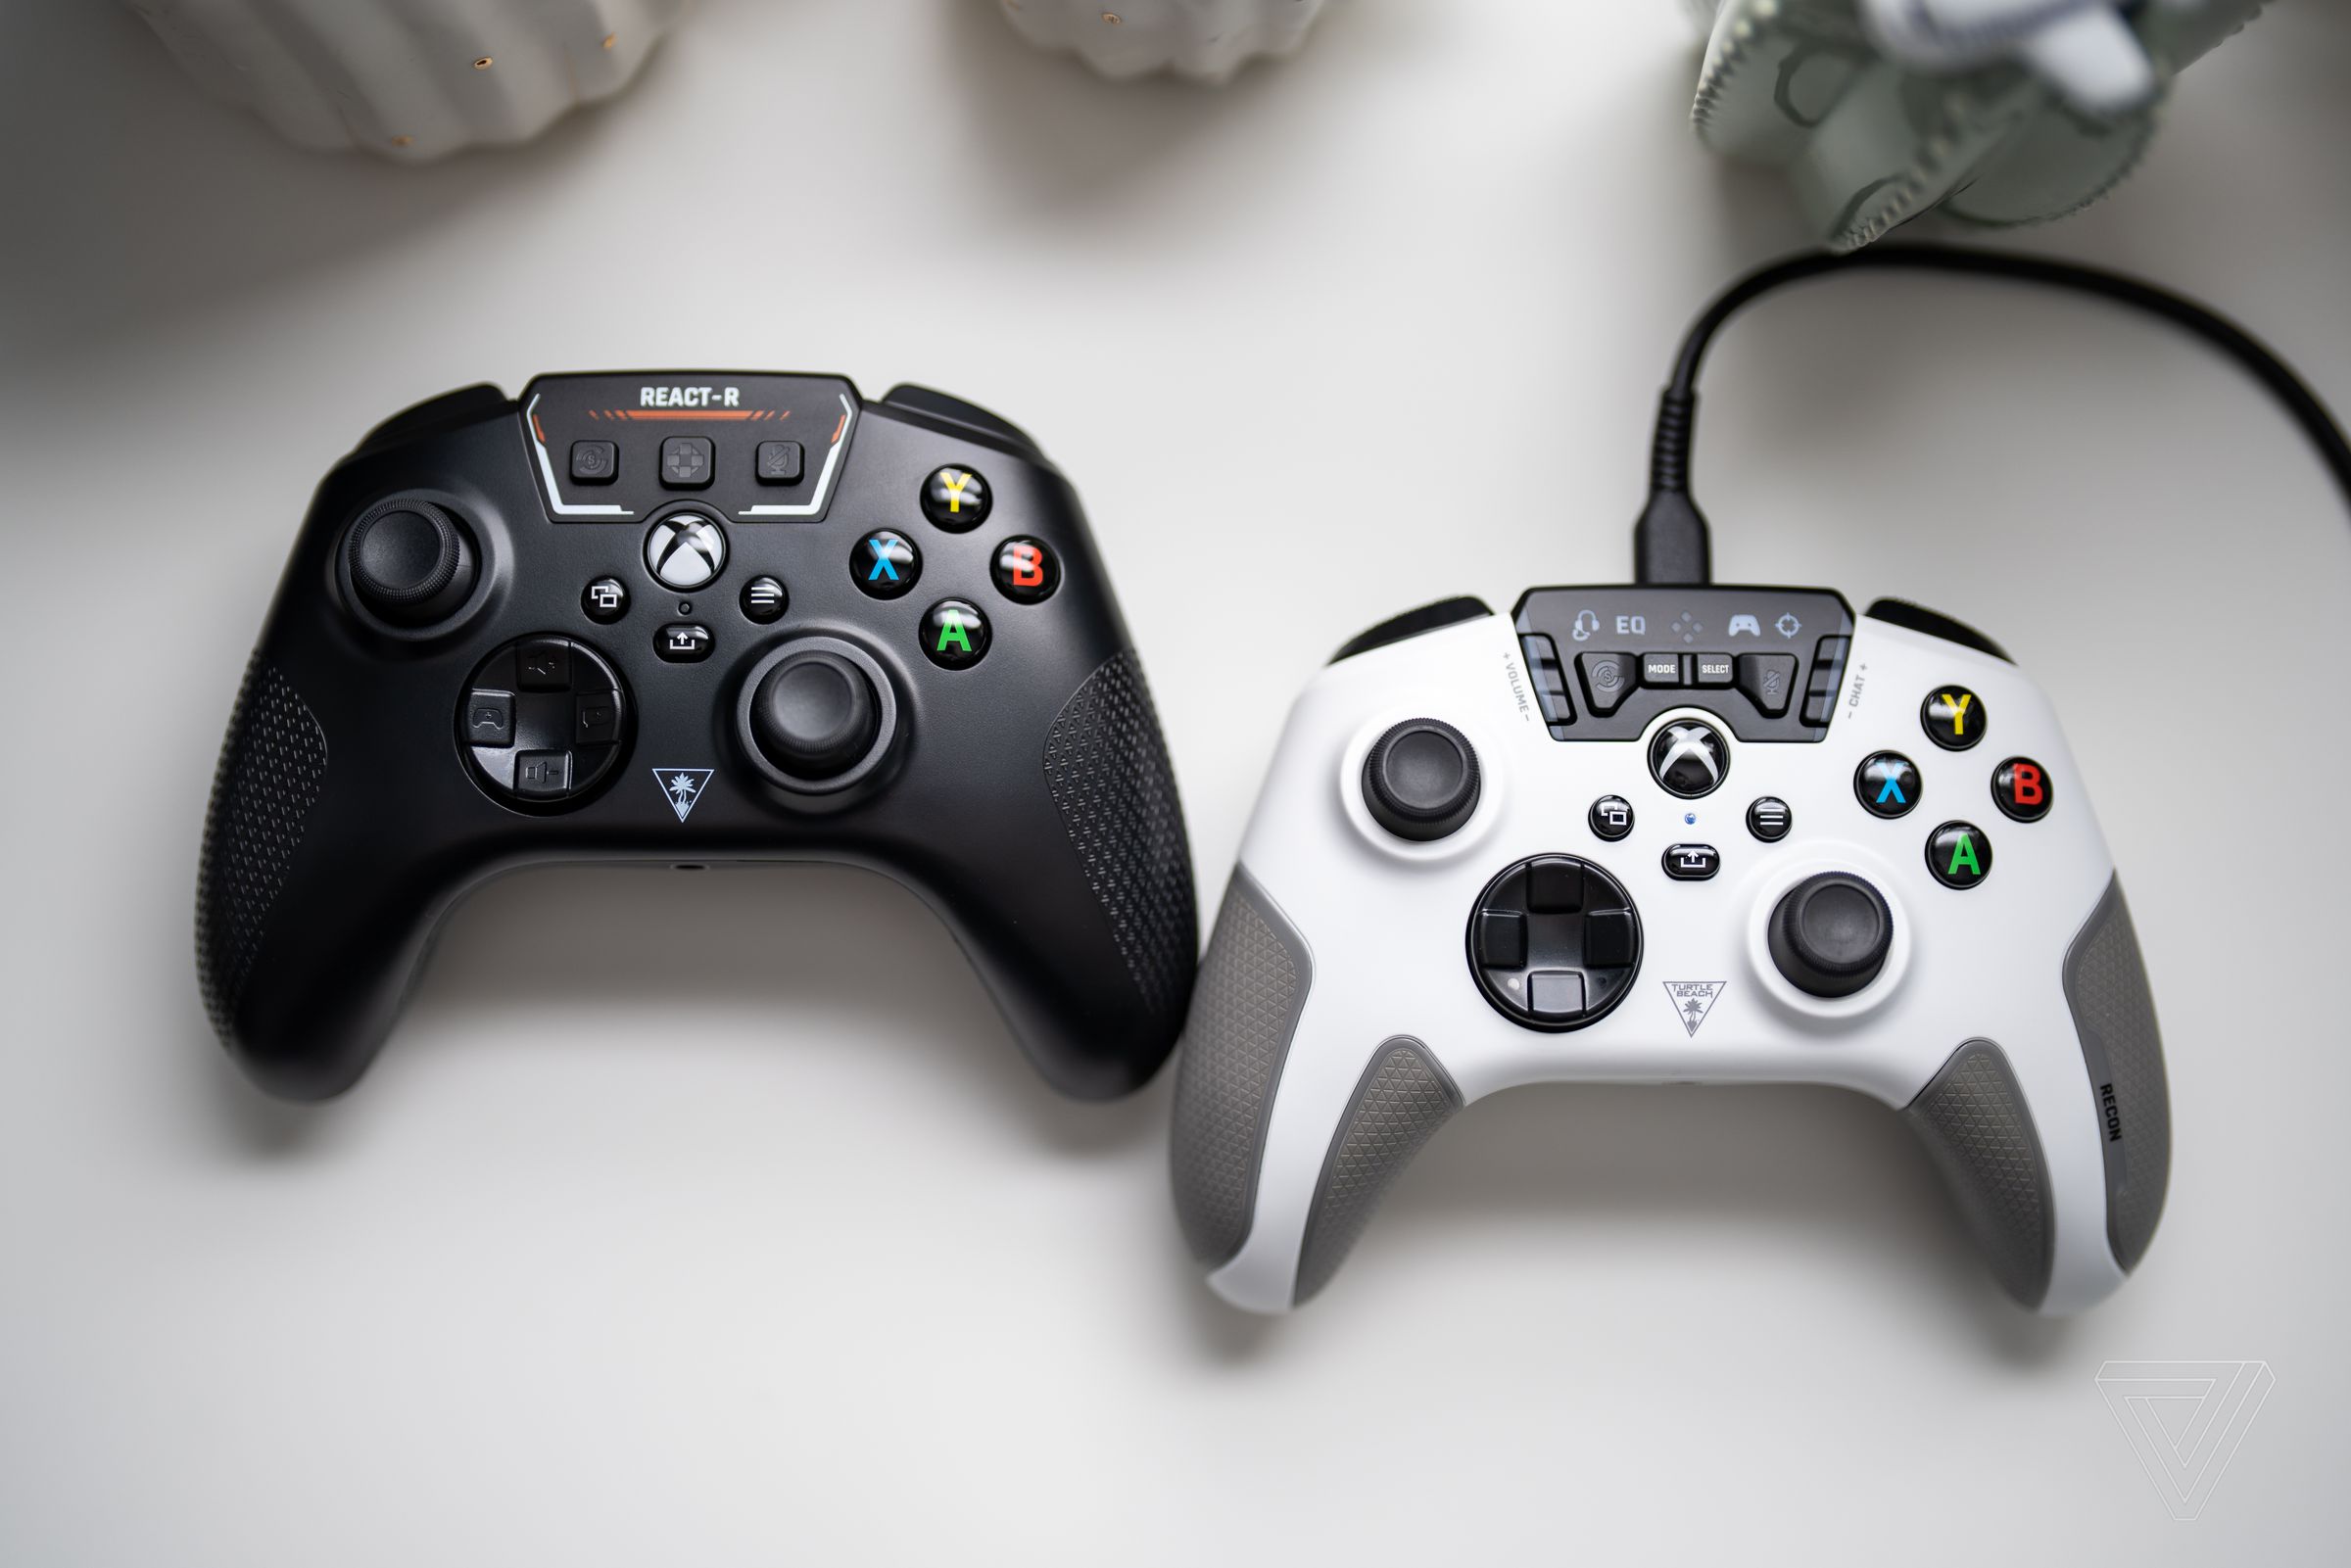 The Recon (right) is the more robust controller, but the new React-R (left) has much more streamlined controls.